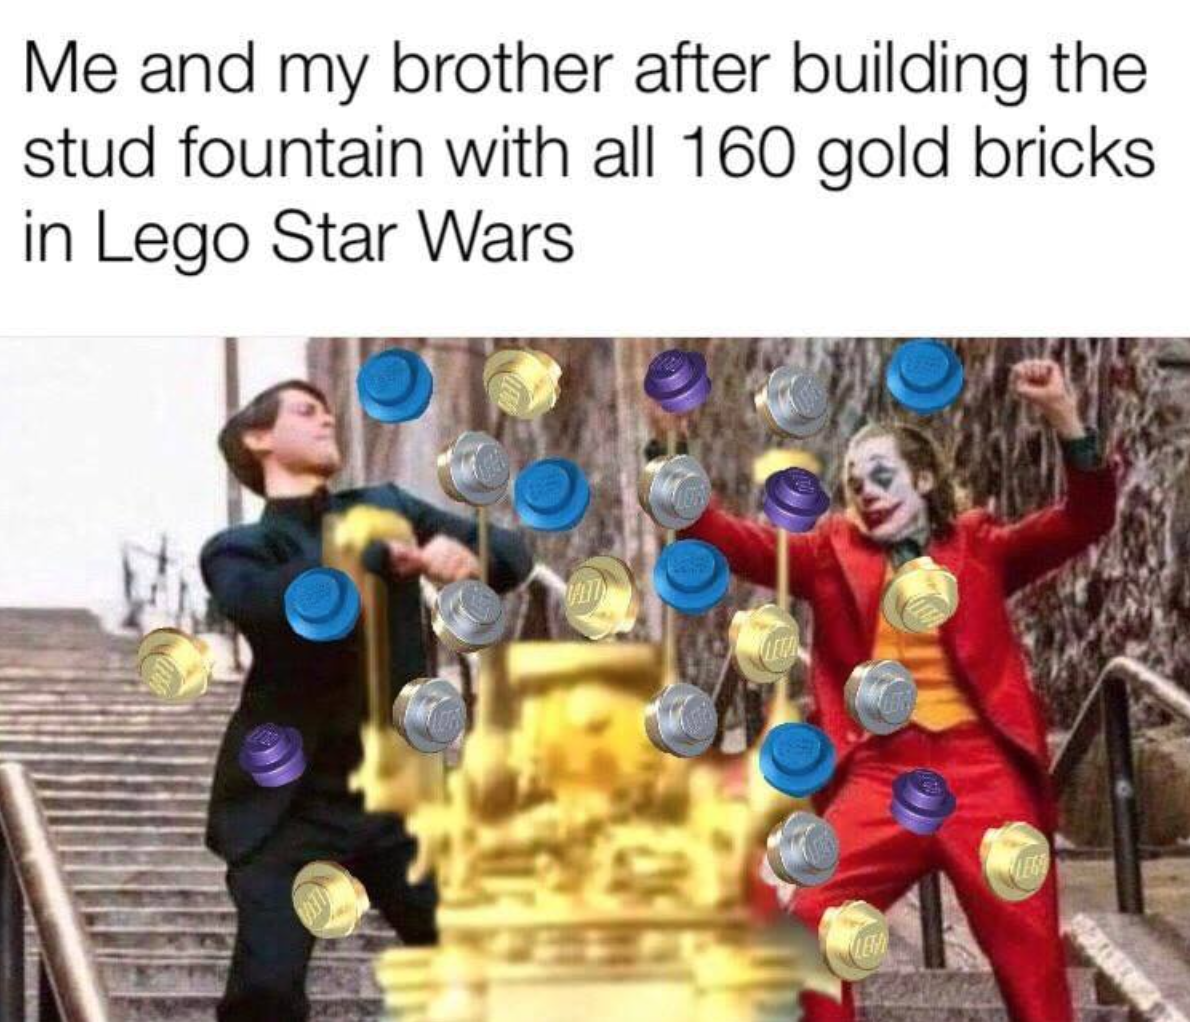 gaming memes - lego studs know your meme - Me and my brother after building the stud fountain with all 160 gold bricks in Lego Star Wars